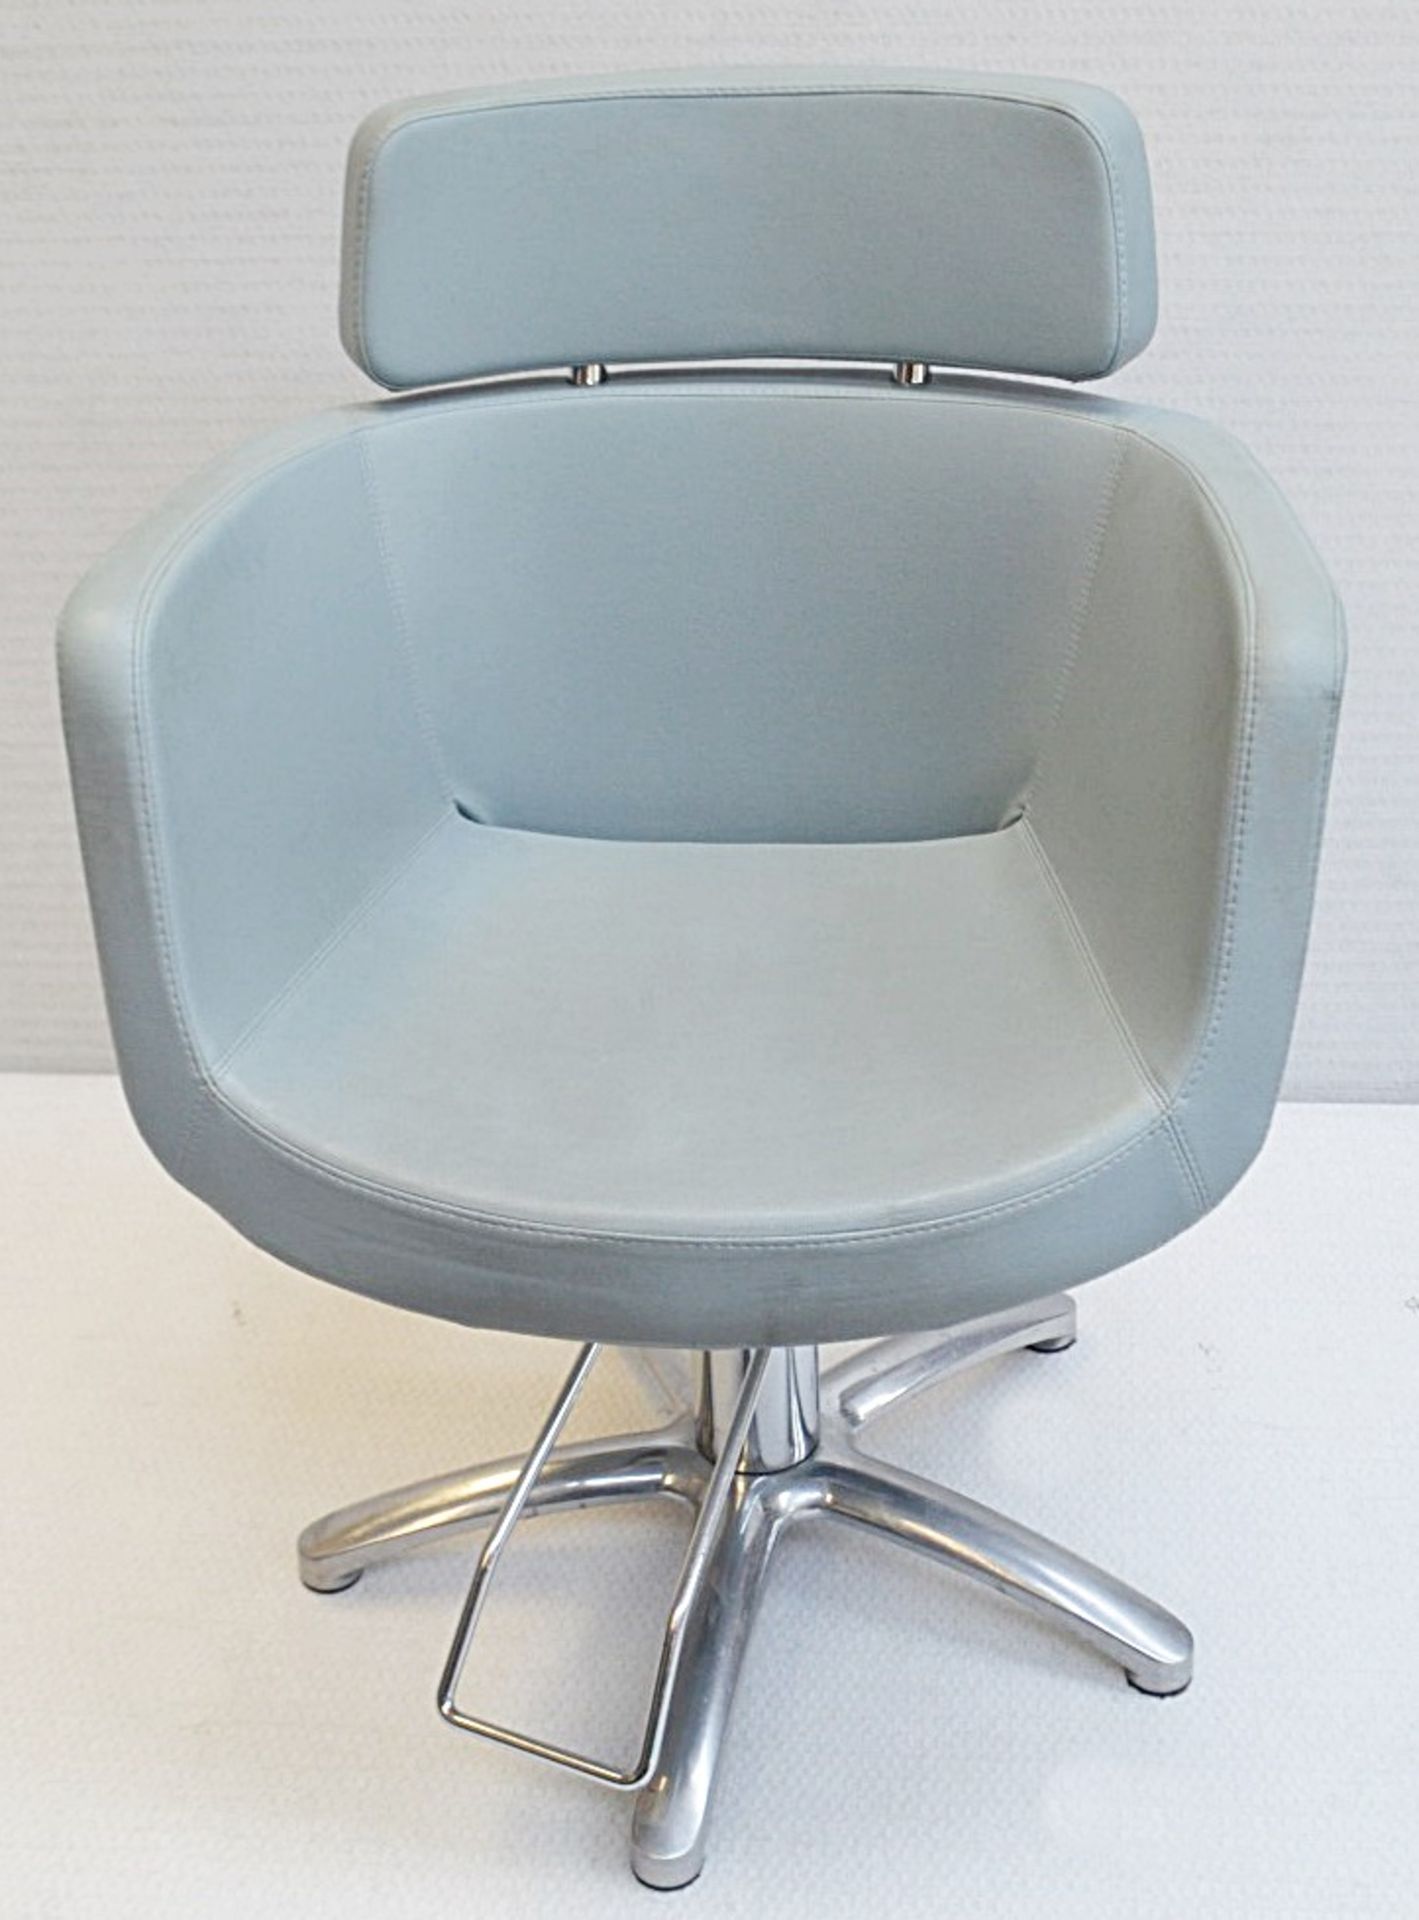 4 x Upholstered Swivel Treatment Chairs - Dimensions: W63 x D55 x H88cm, Seat 49cm - Ref: MHB101 - Image 2 of 3